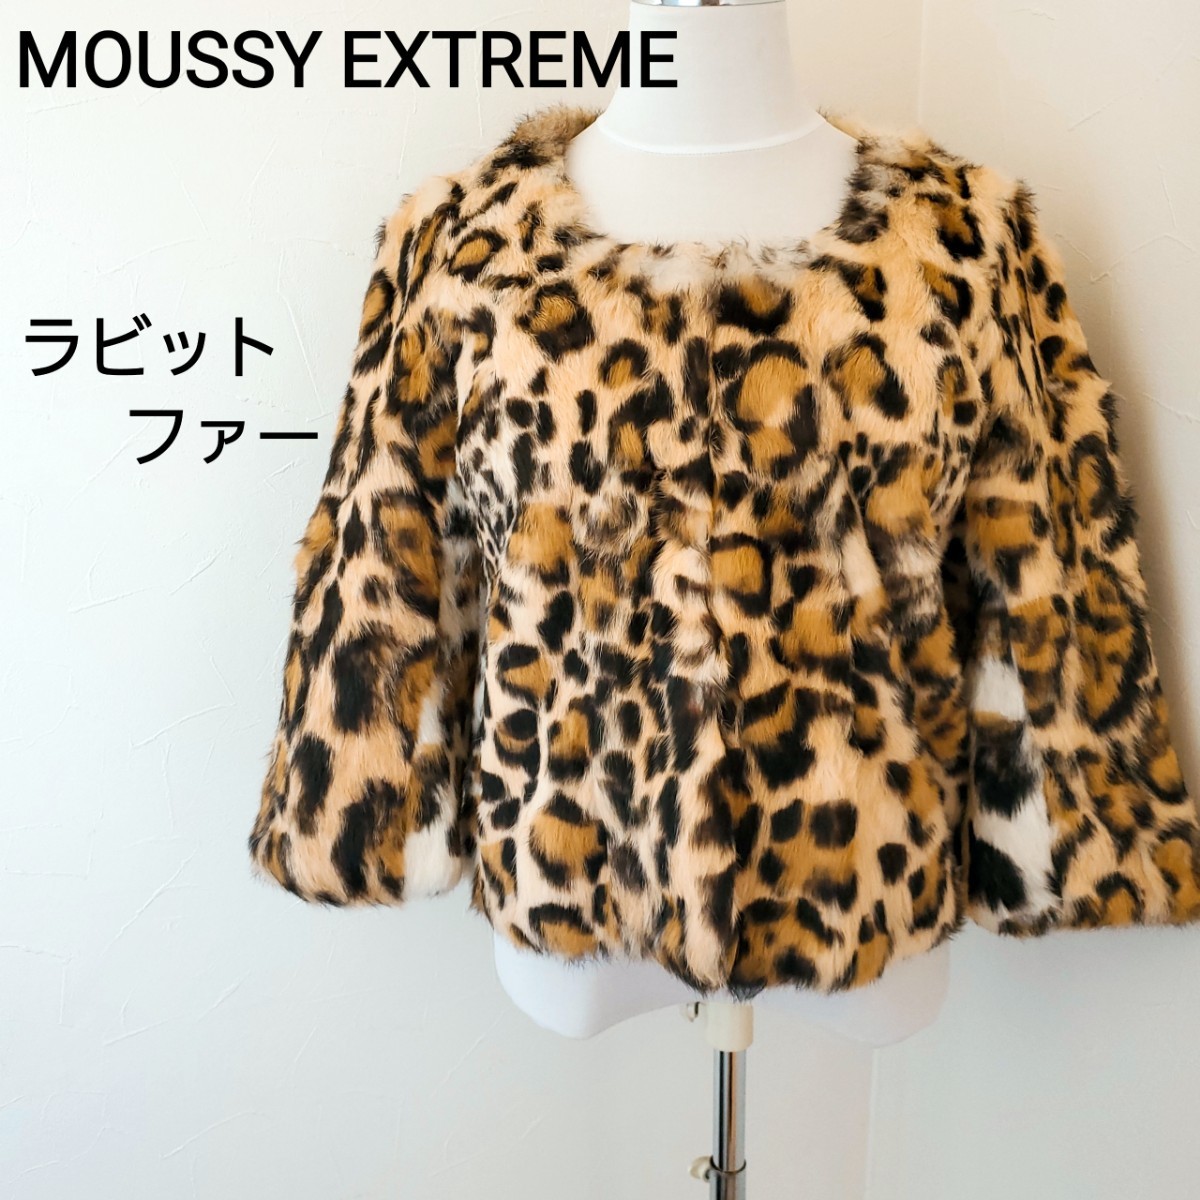 MOUSSY EXTREME/ラビットファーレオパード柄ショートコート/ヒョウ柄